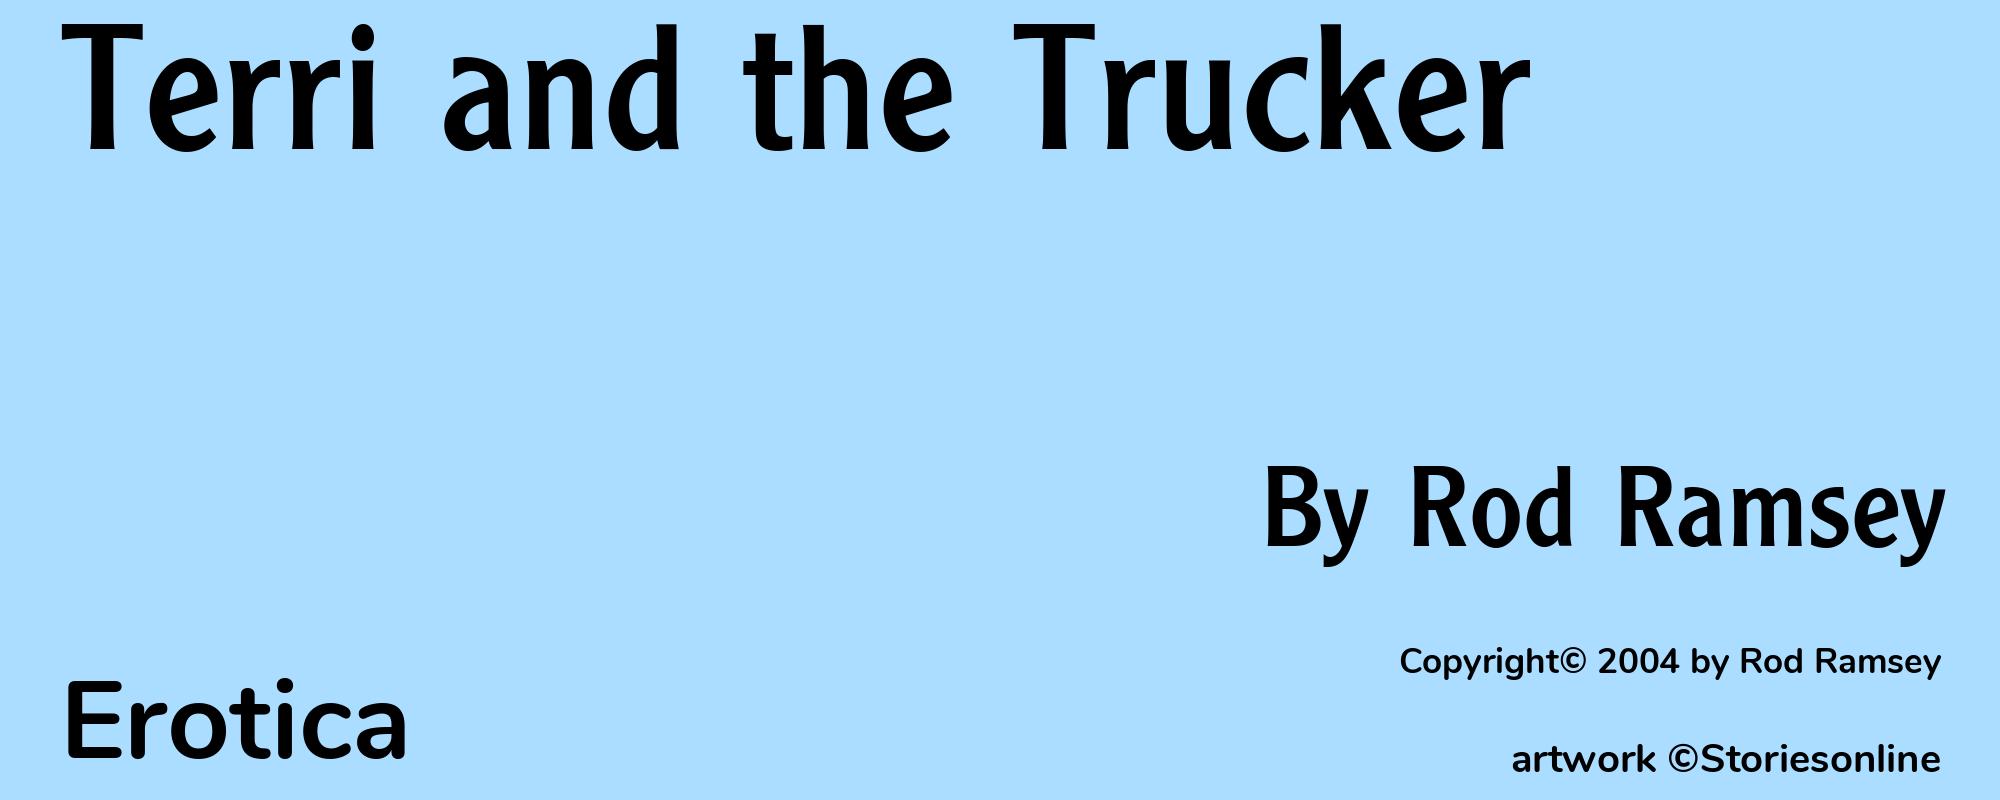 Terri and the Trucker - Cover